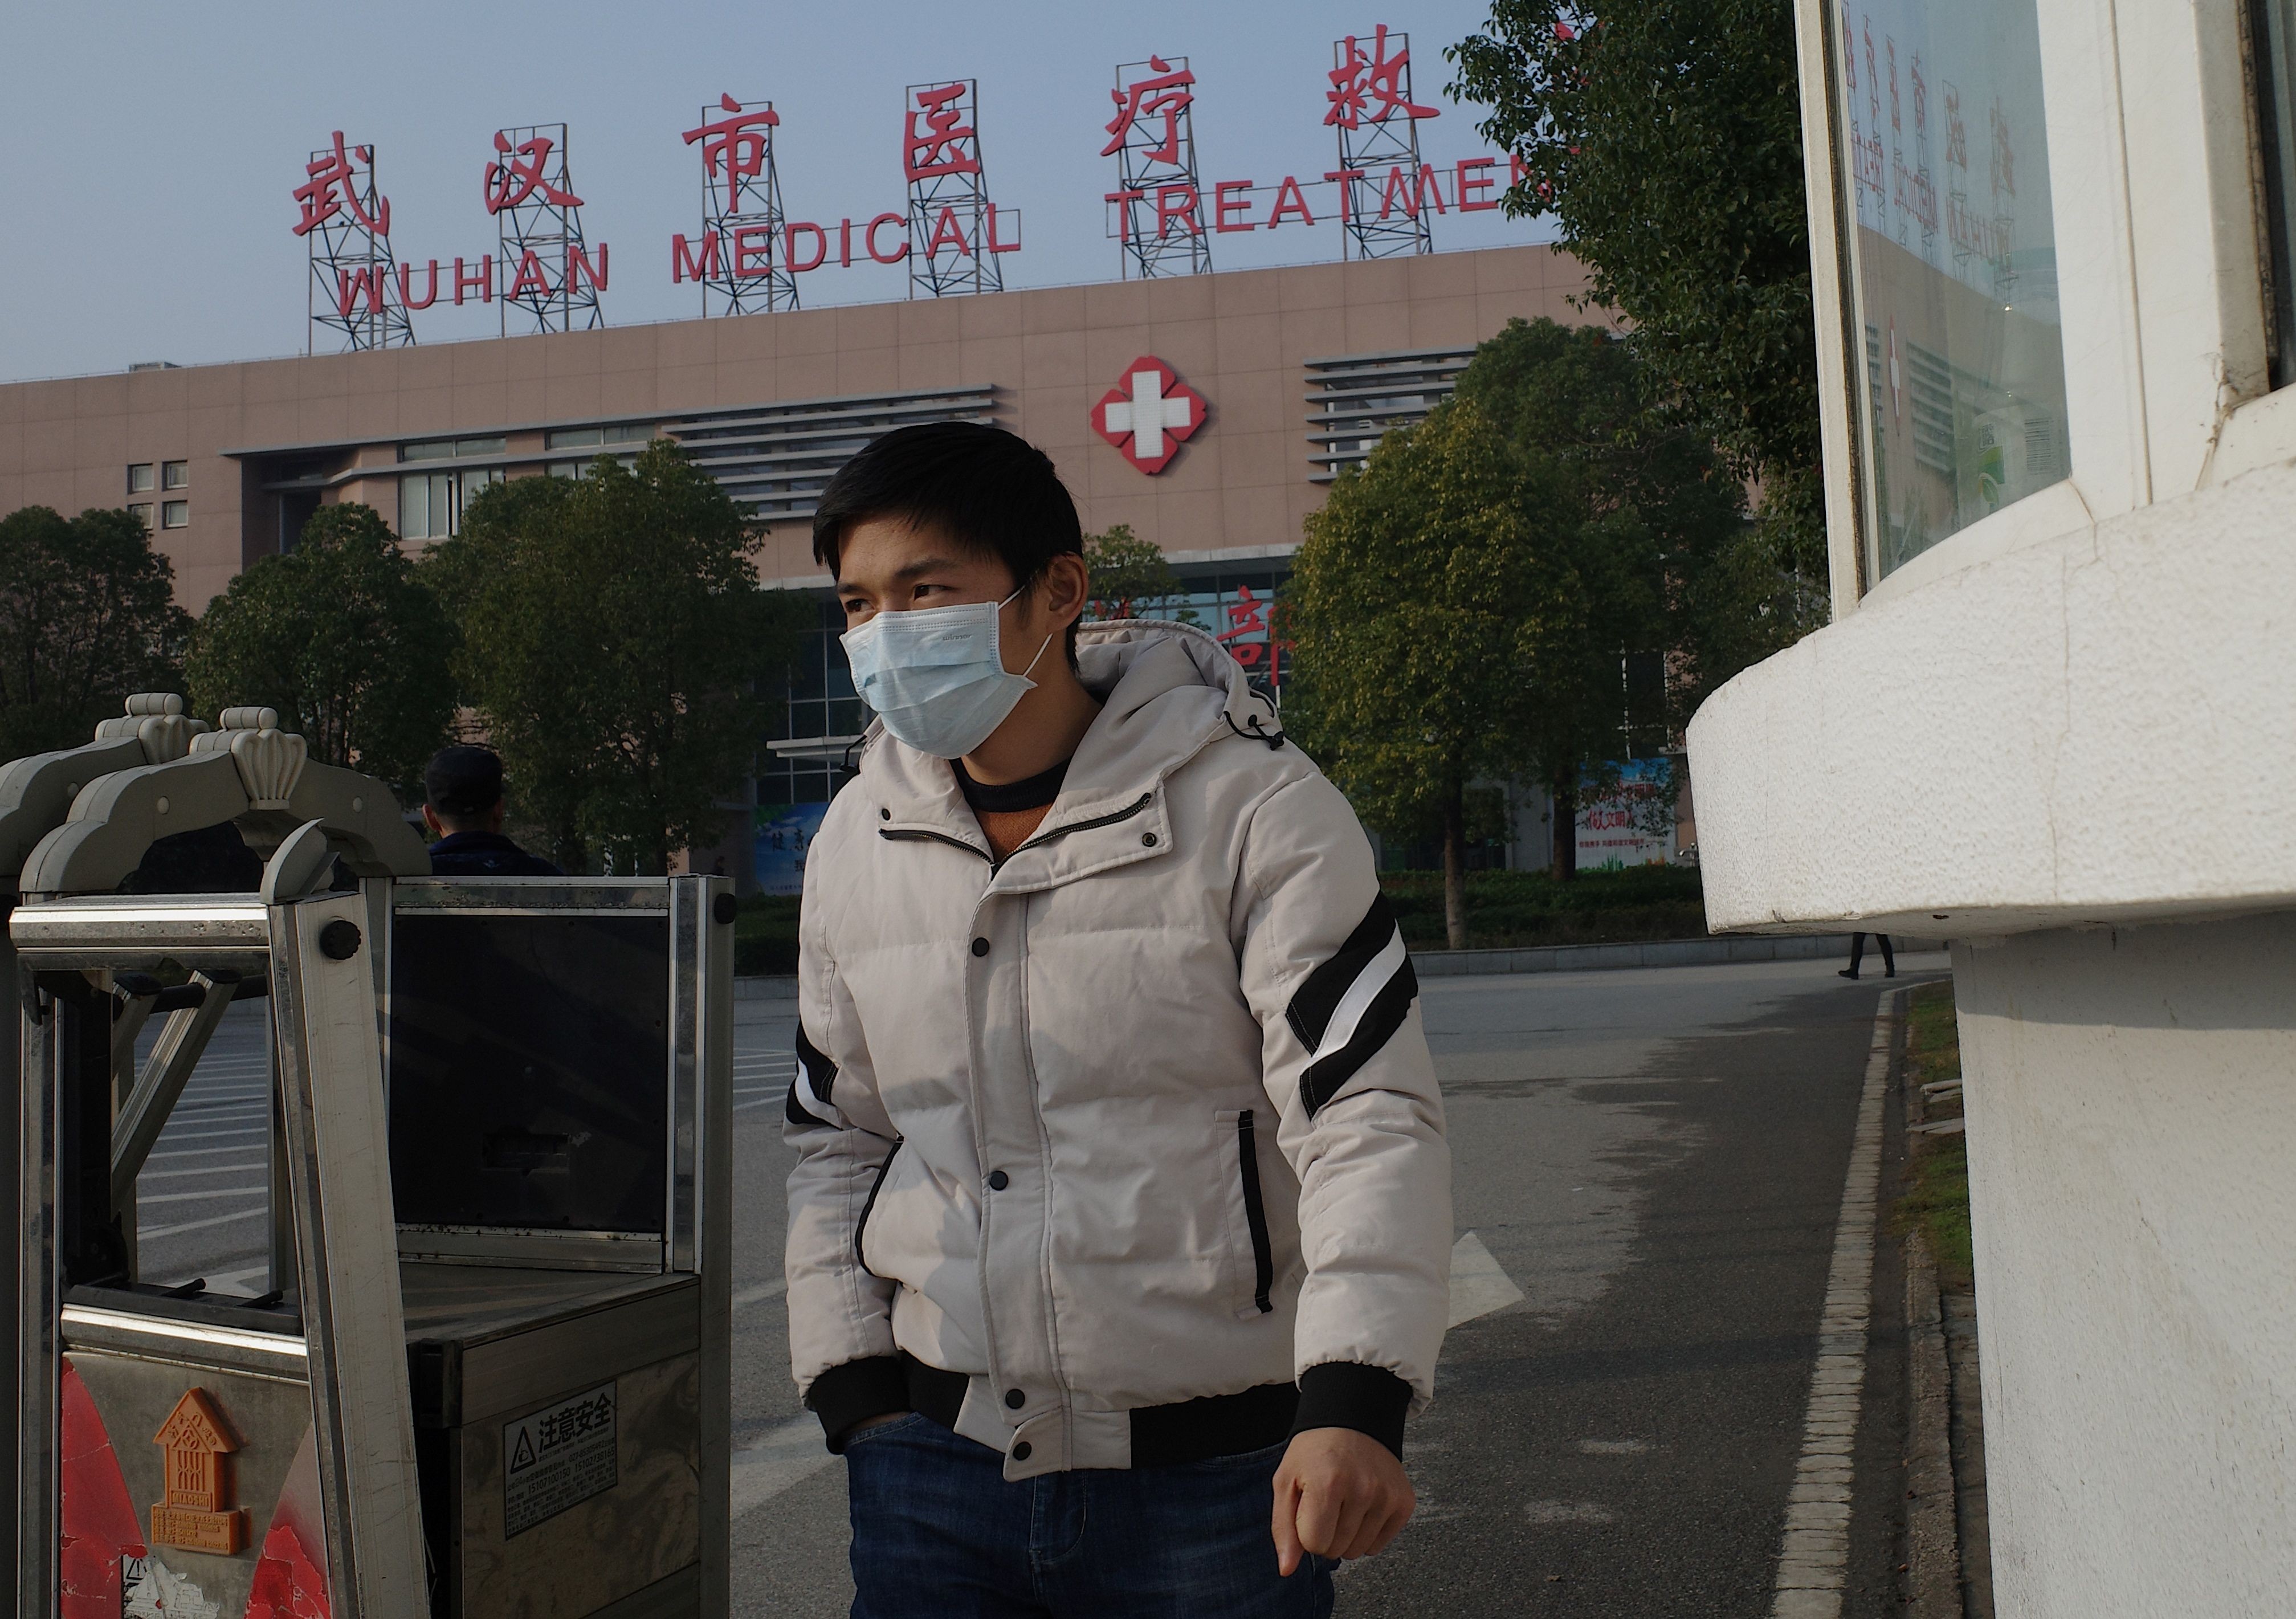 A man leaves a medical centre in Wuhan, where the coronavirus is thought to have originated. Photo: AFP